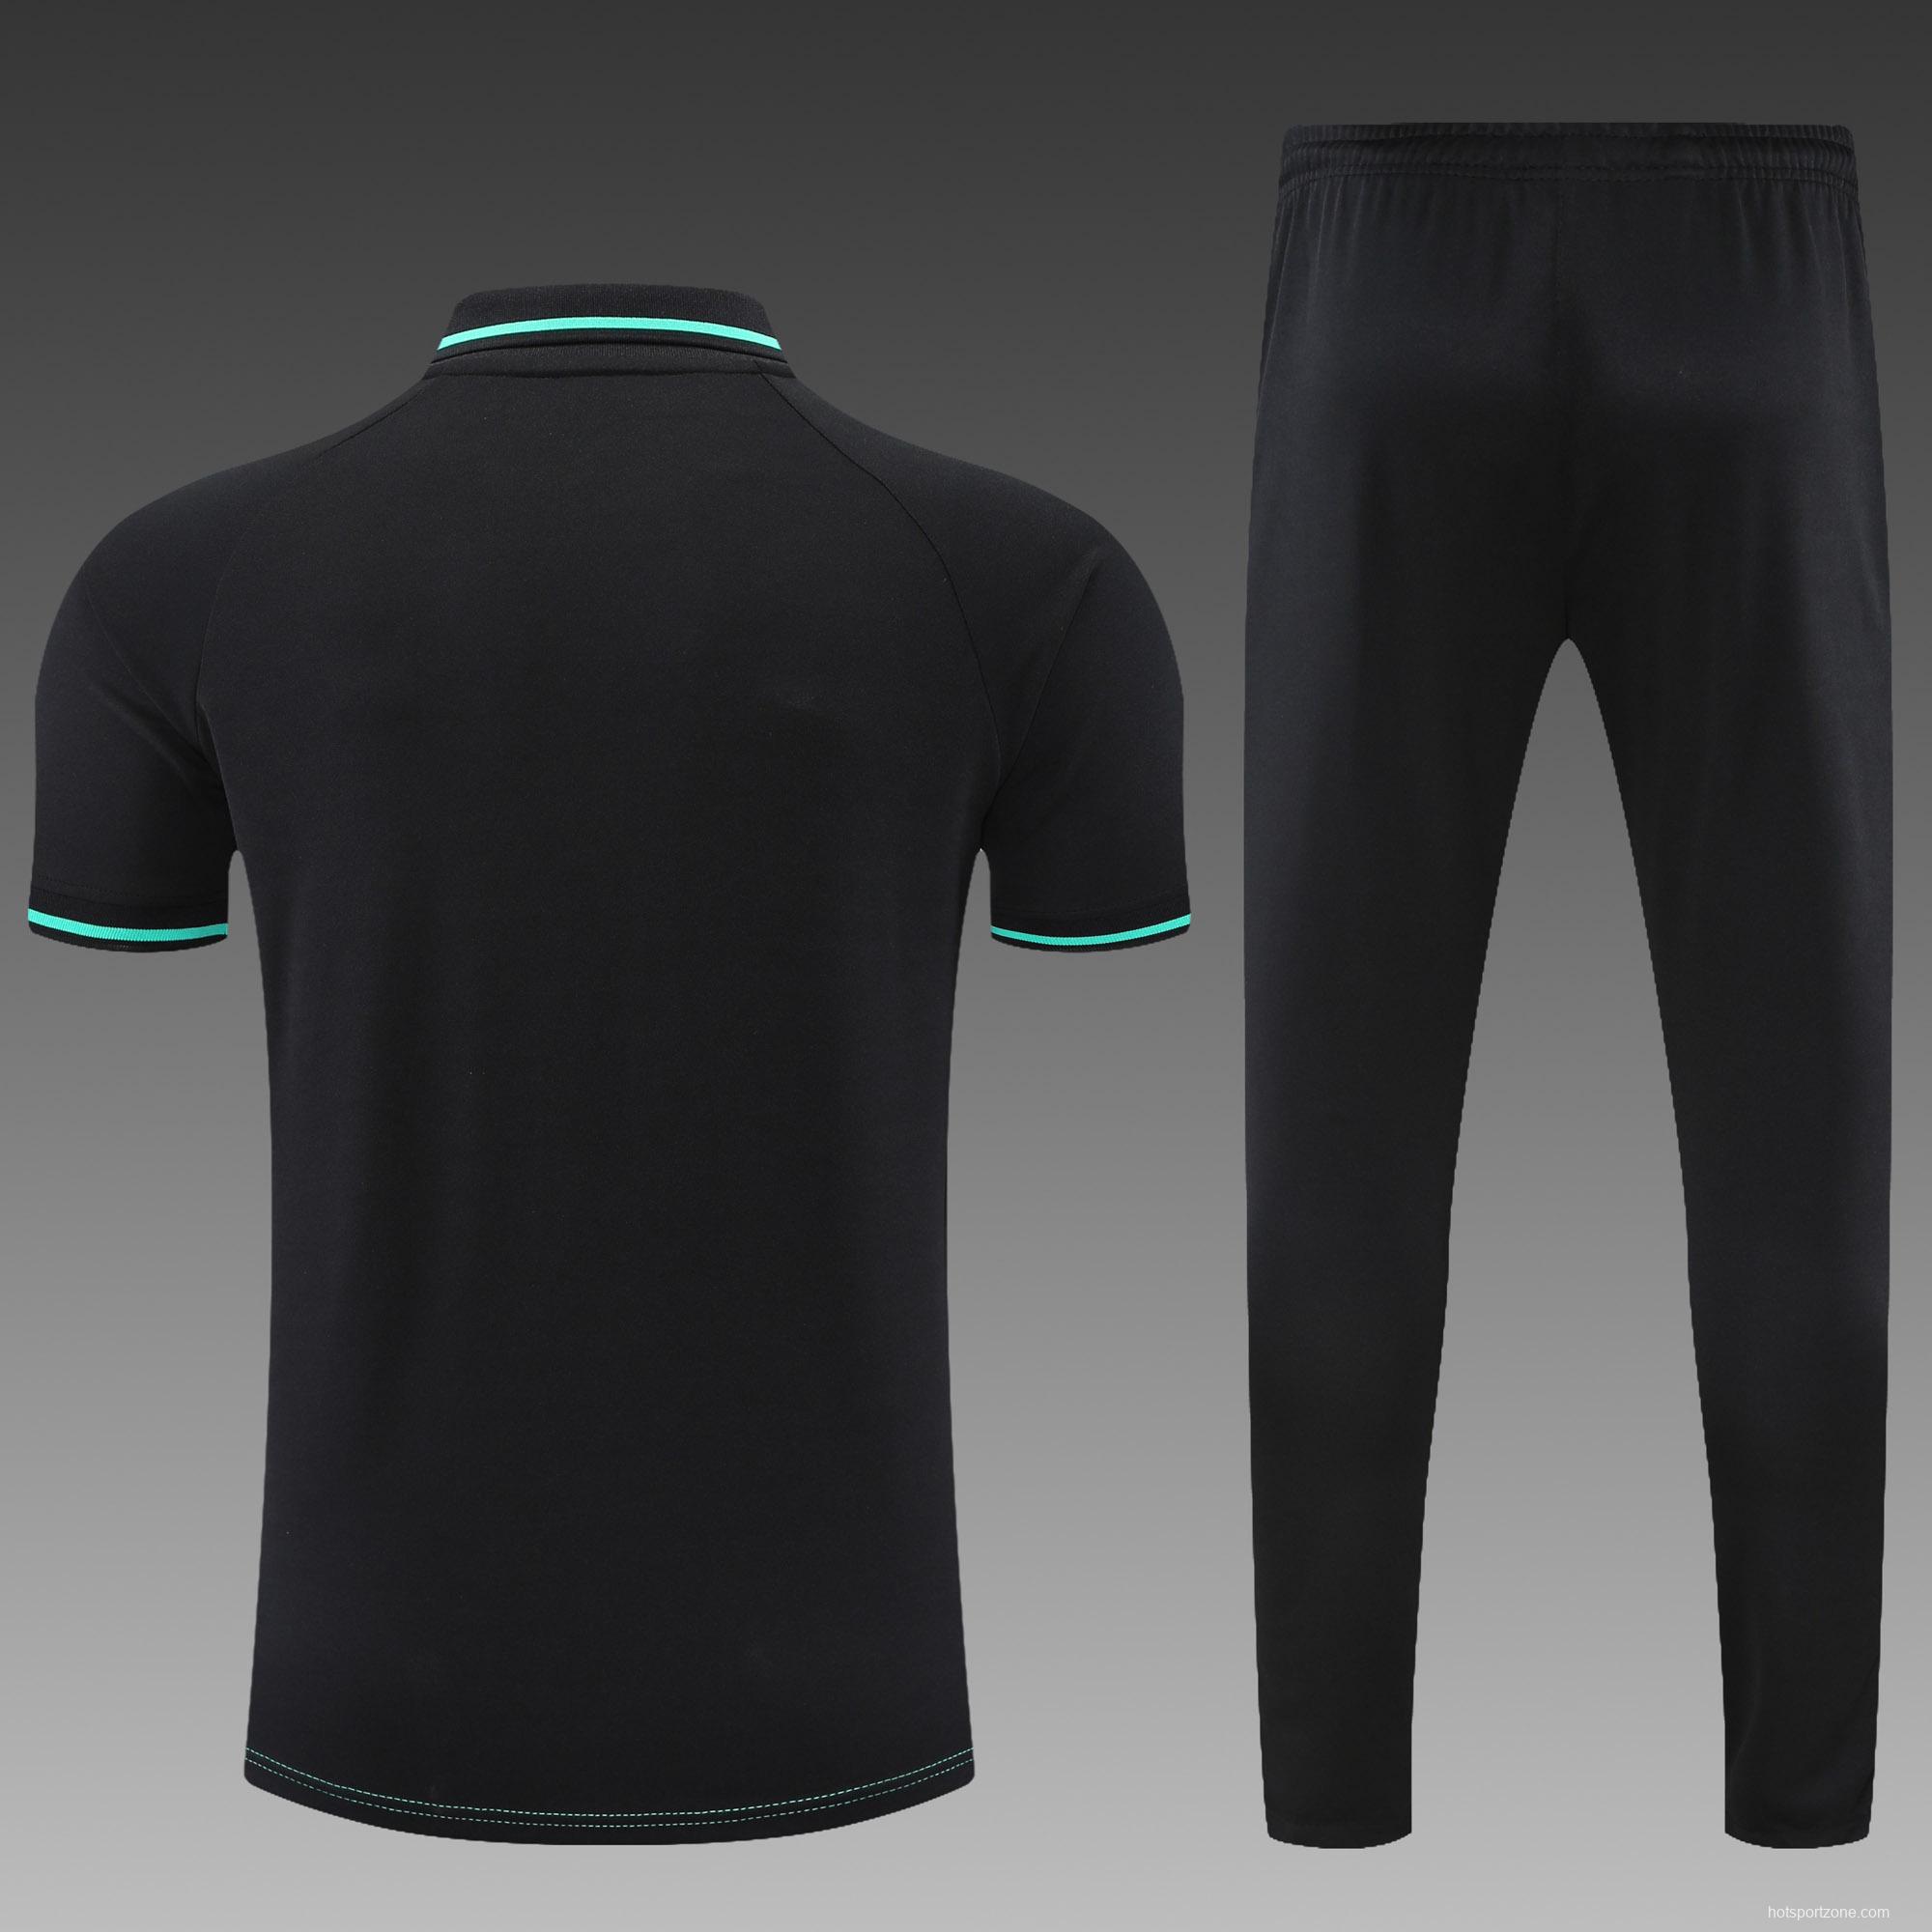 Real Madrid POLO kit black and green (not supported to be sold separately)